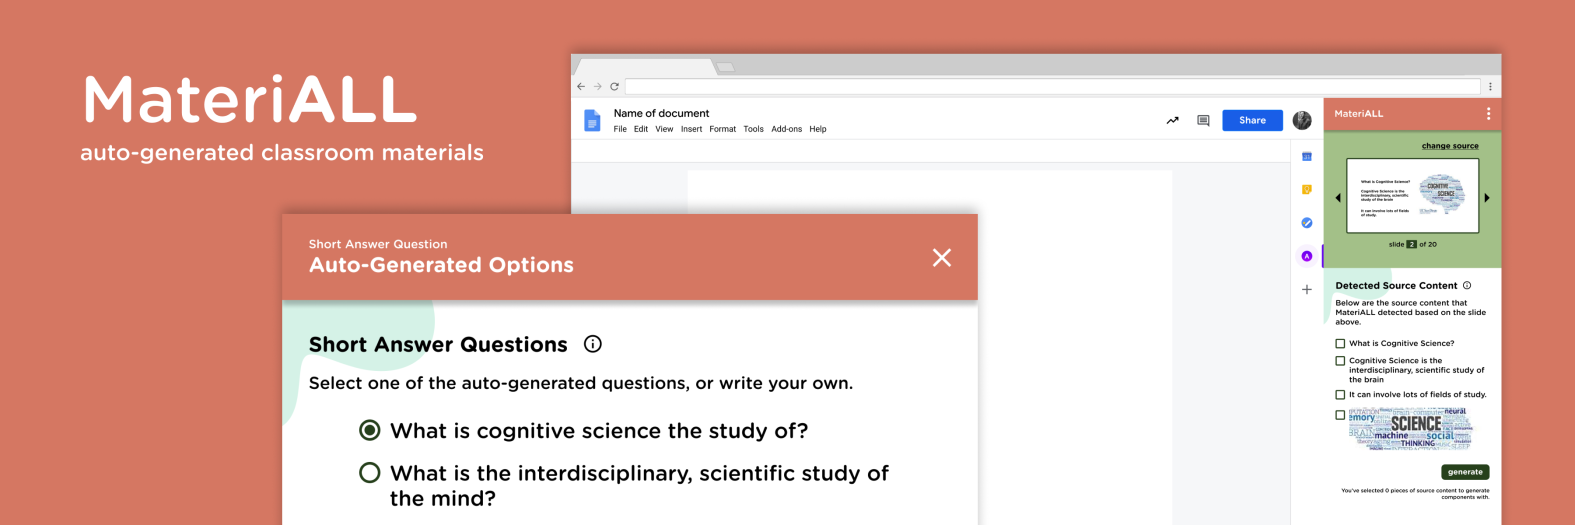 MateriALL sidebar UI and question editor modal